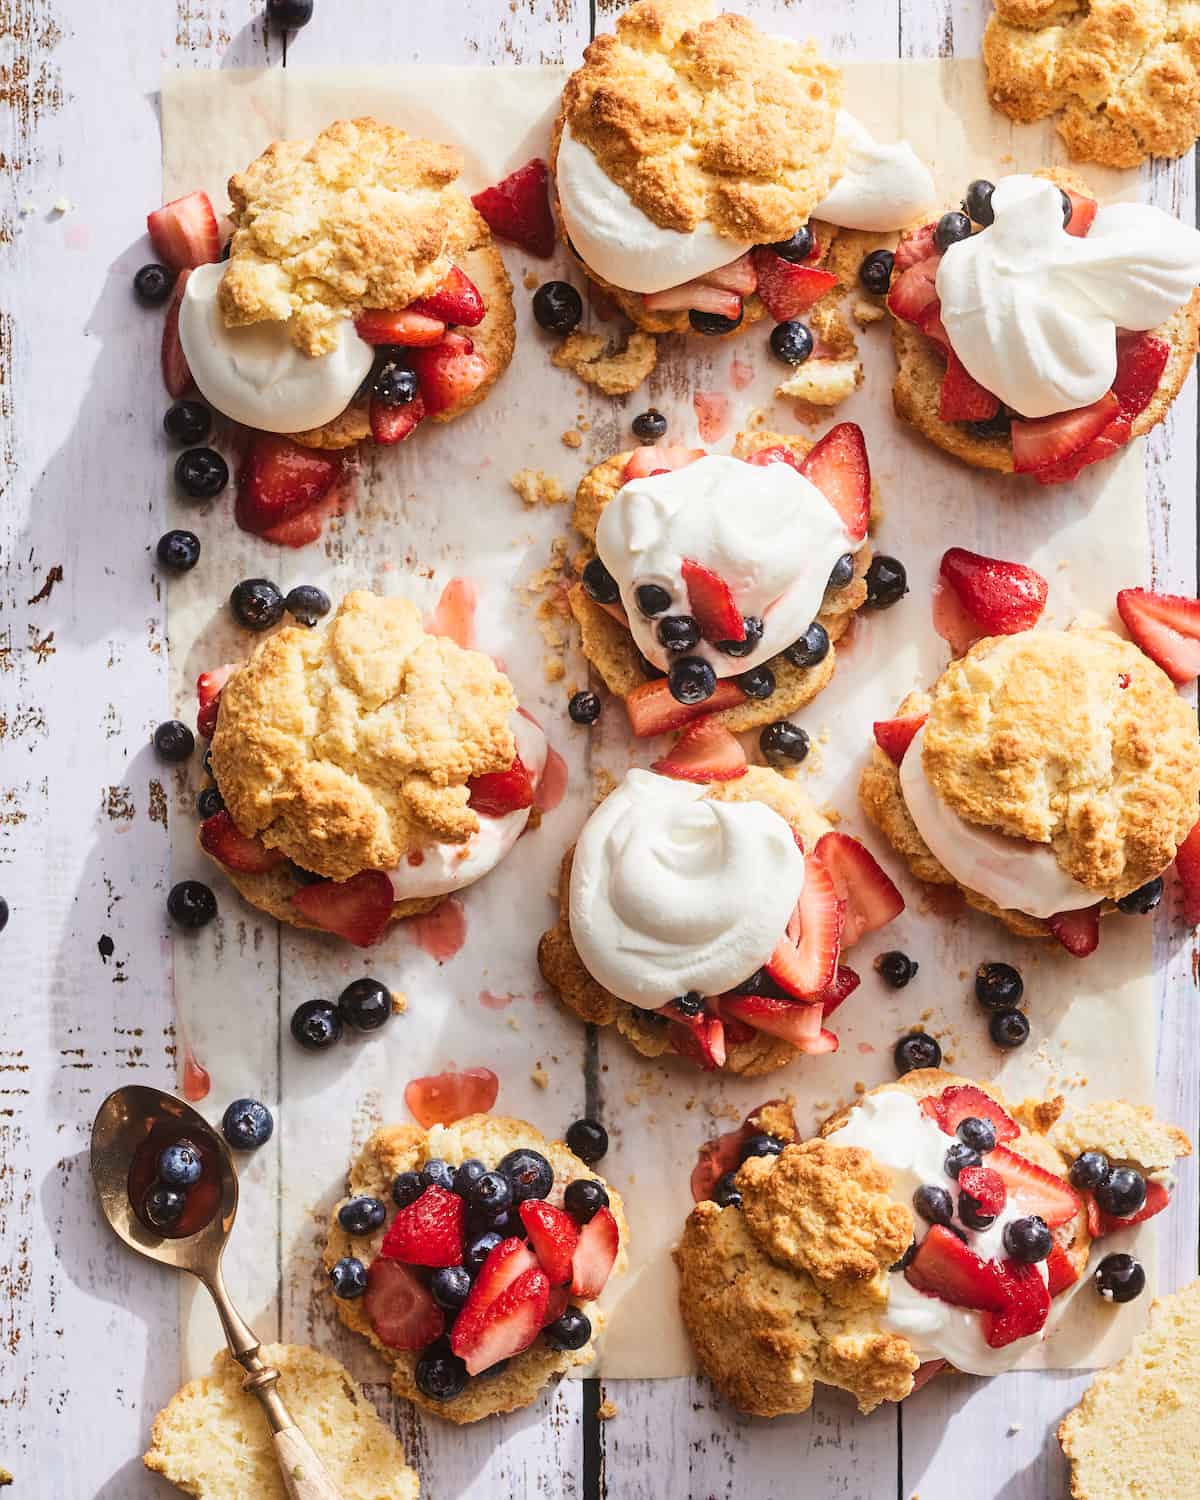 10 Strawberry Shortcakes with blueberries and whipped cream sitting on top of parchment paper on a wooden table.  